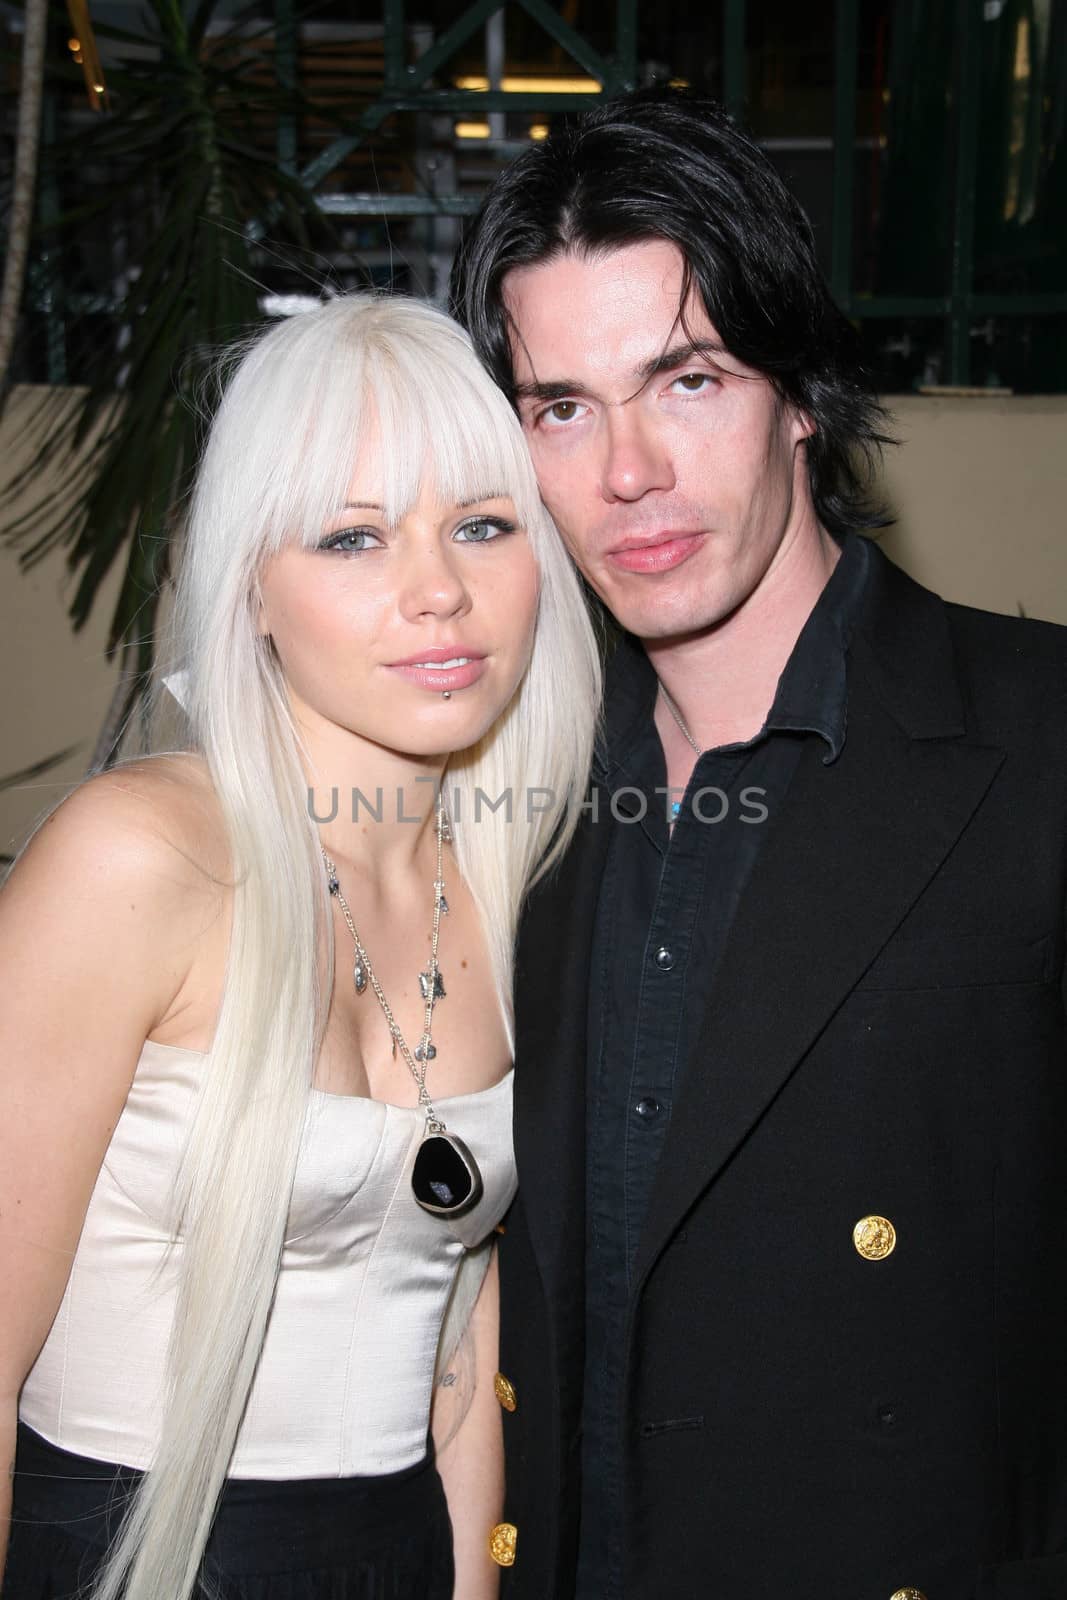 Kerli and Julian Shah at the Launch party for "Starring...!" Fragrances and "Charmed" Jewelry, benefitting Tree People. Whole Foods Lifestyle Store, Los Angeles, CA. 04-21-08